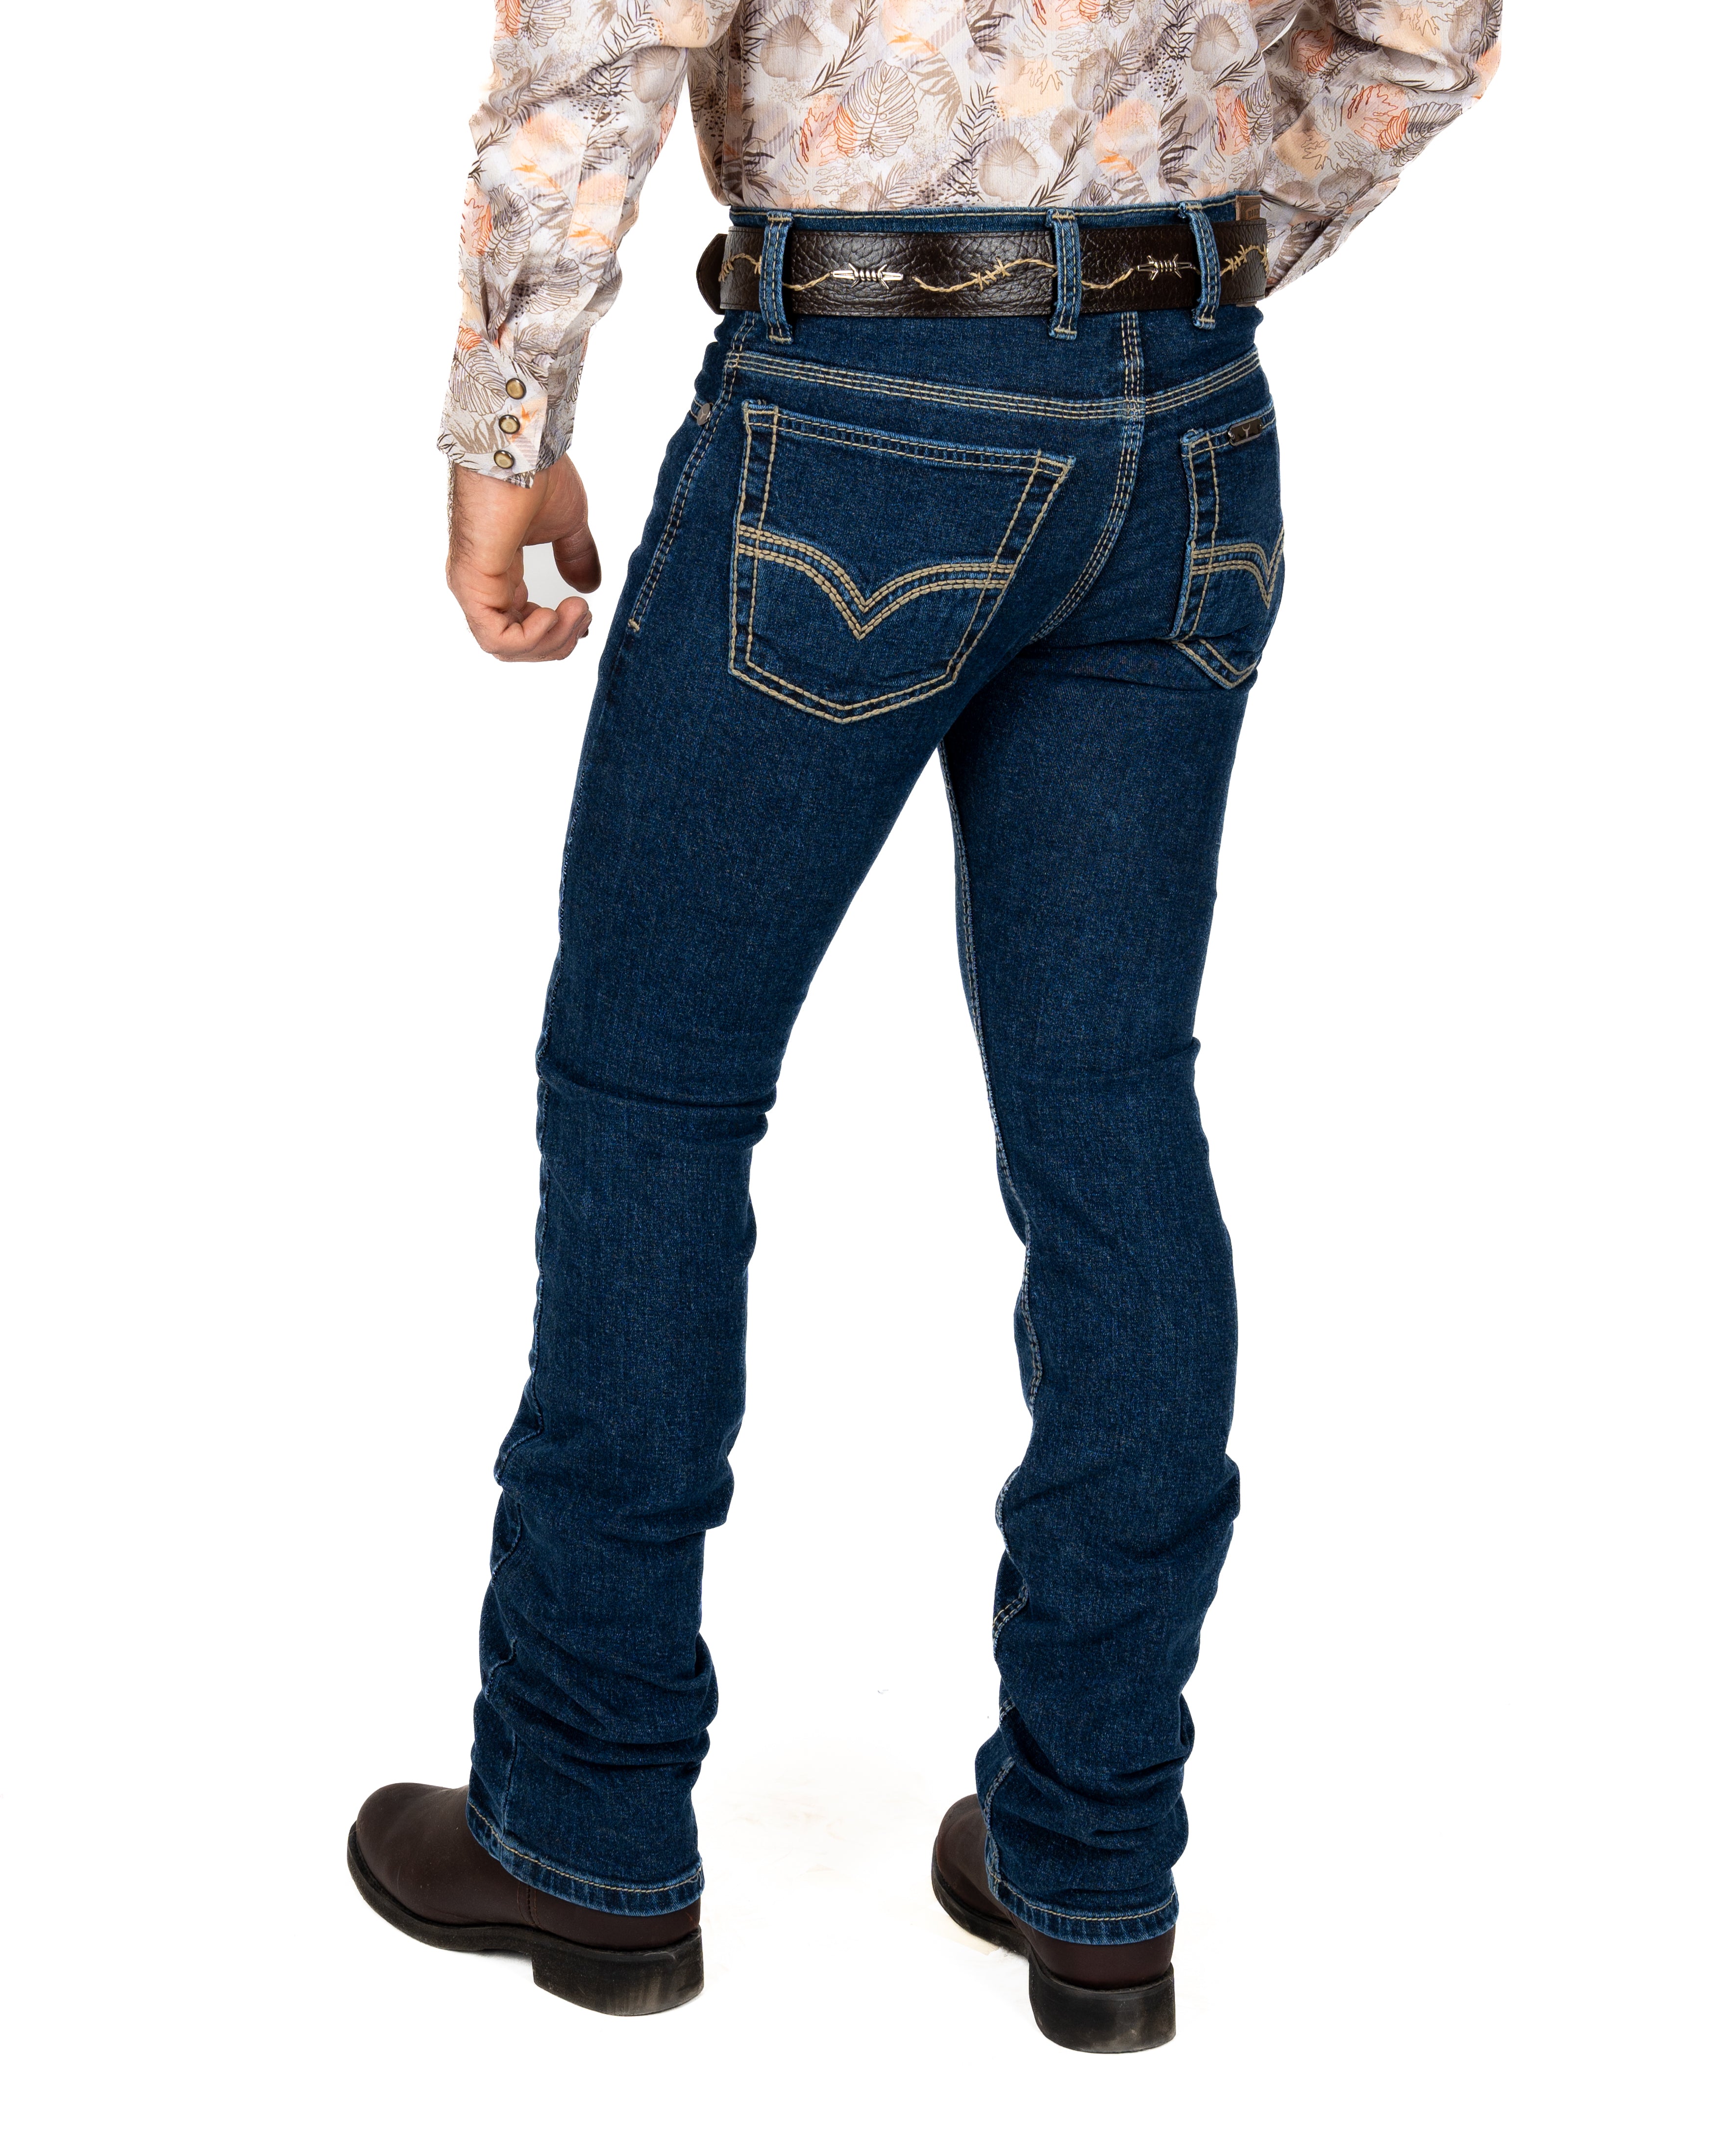 Jeans Rodeo West CB303 Caballero